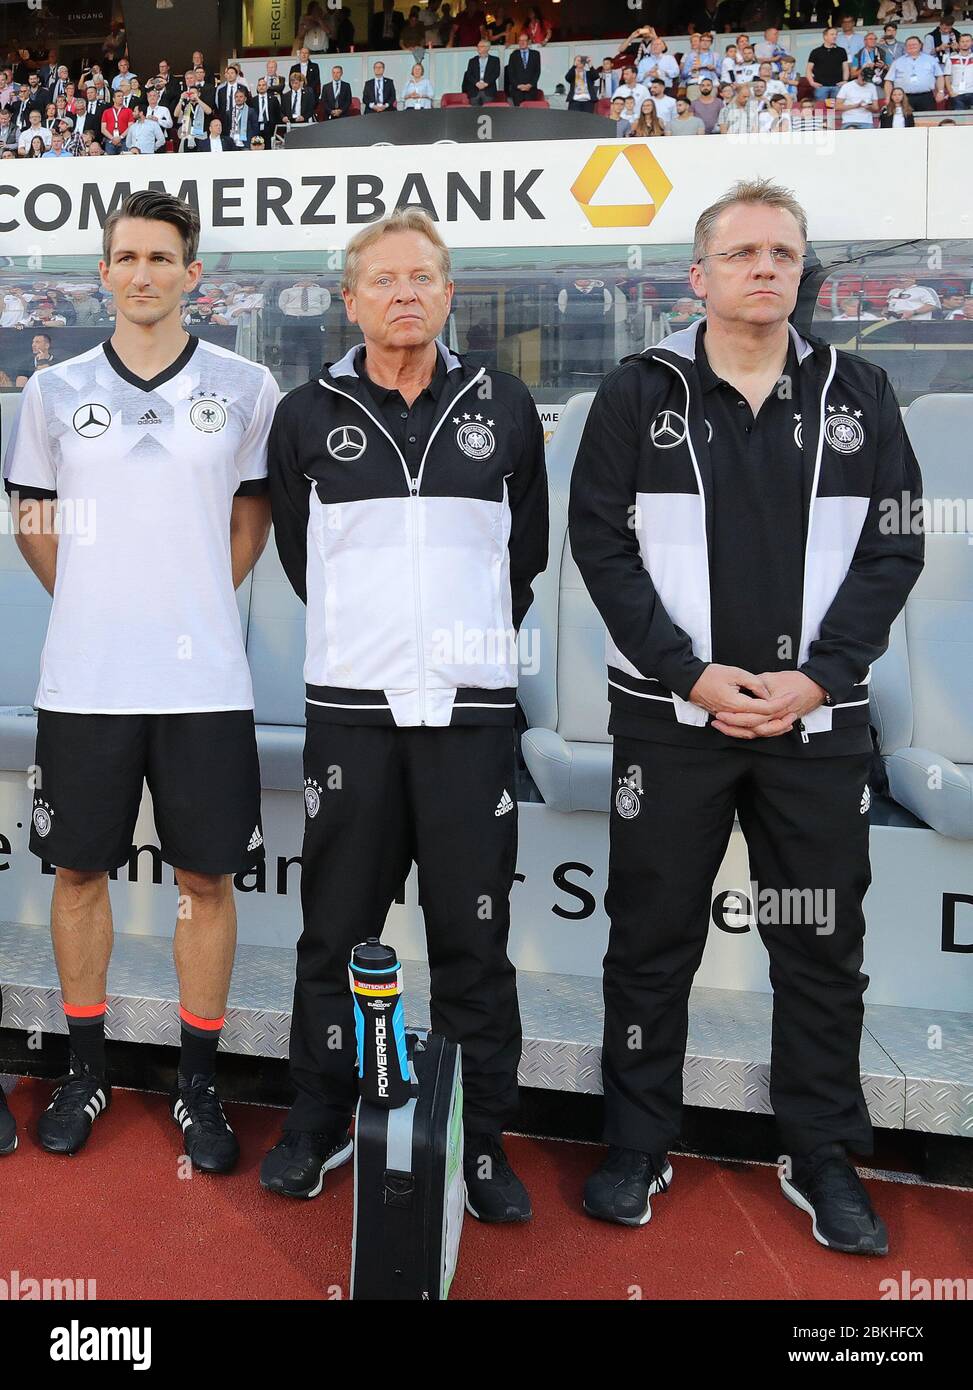 firo: 10.06.2017, Fuvuball, football, international, national team Germany, World Cup qualification, qualification, GER, Germany - San Marino 7: 0 bank, substitute bank with Bundescoach LvñW, SCHNEIDER, KvñPKE ,, COMMERZBANK, team doctor Prof. Dr. on the right . Tim Meyer | usage worldwide Stock Photo